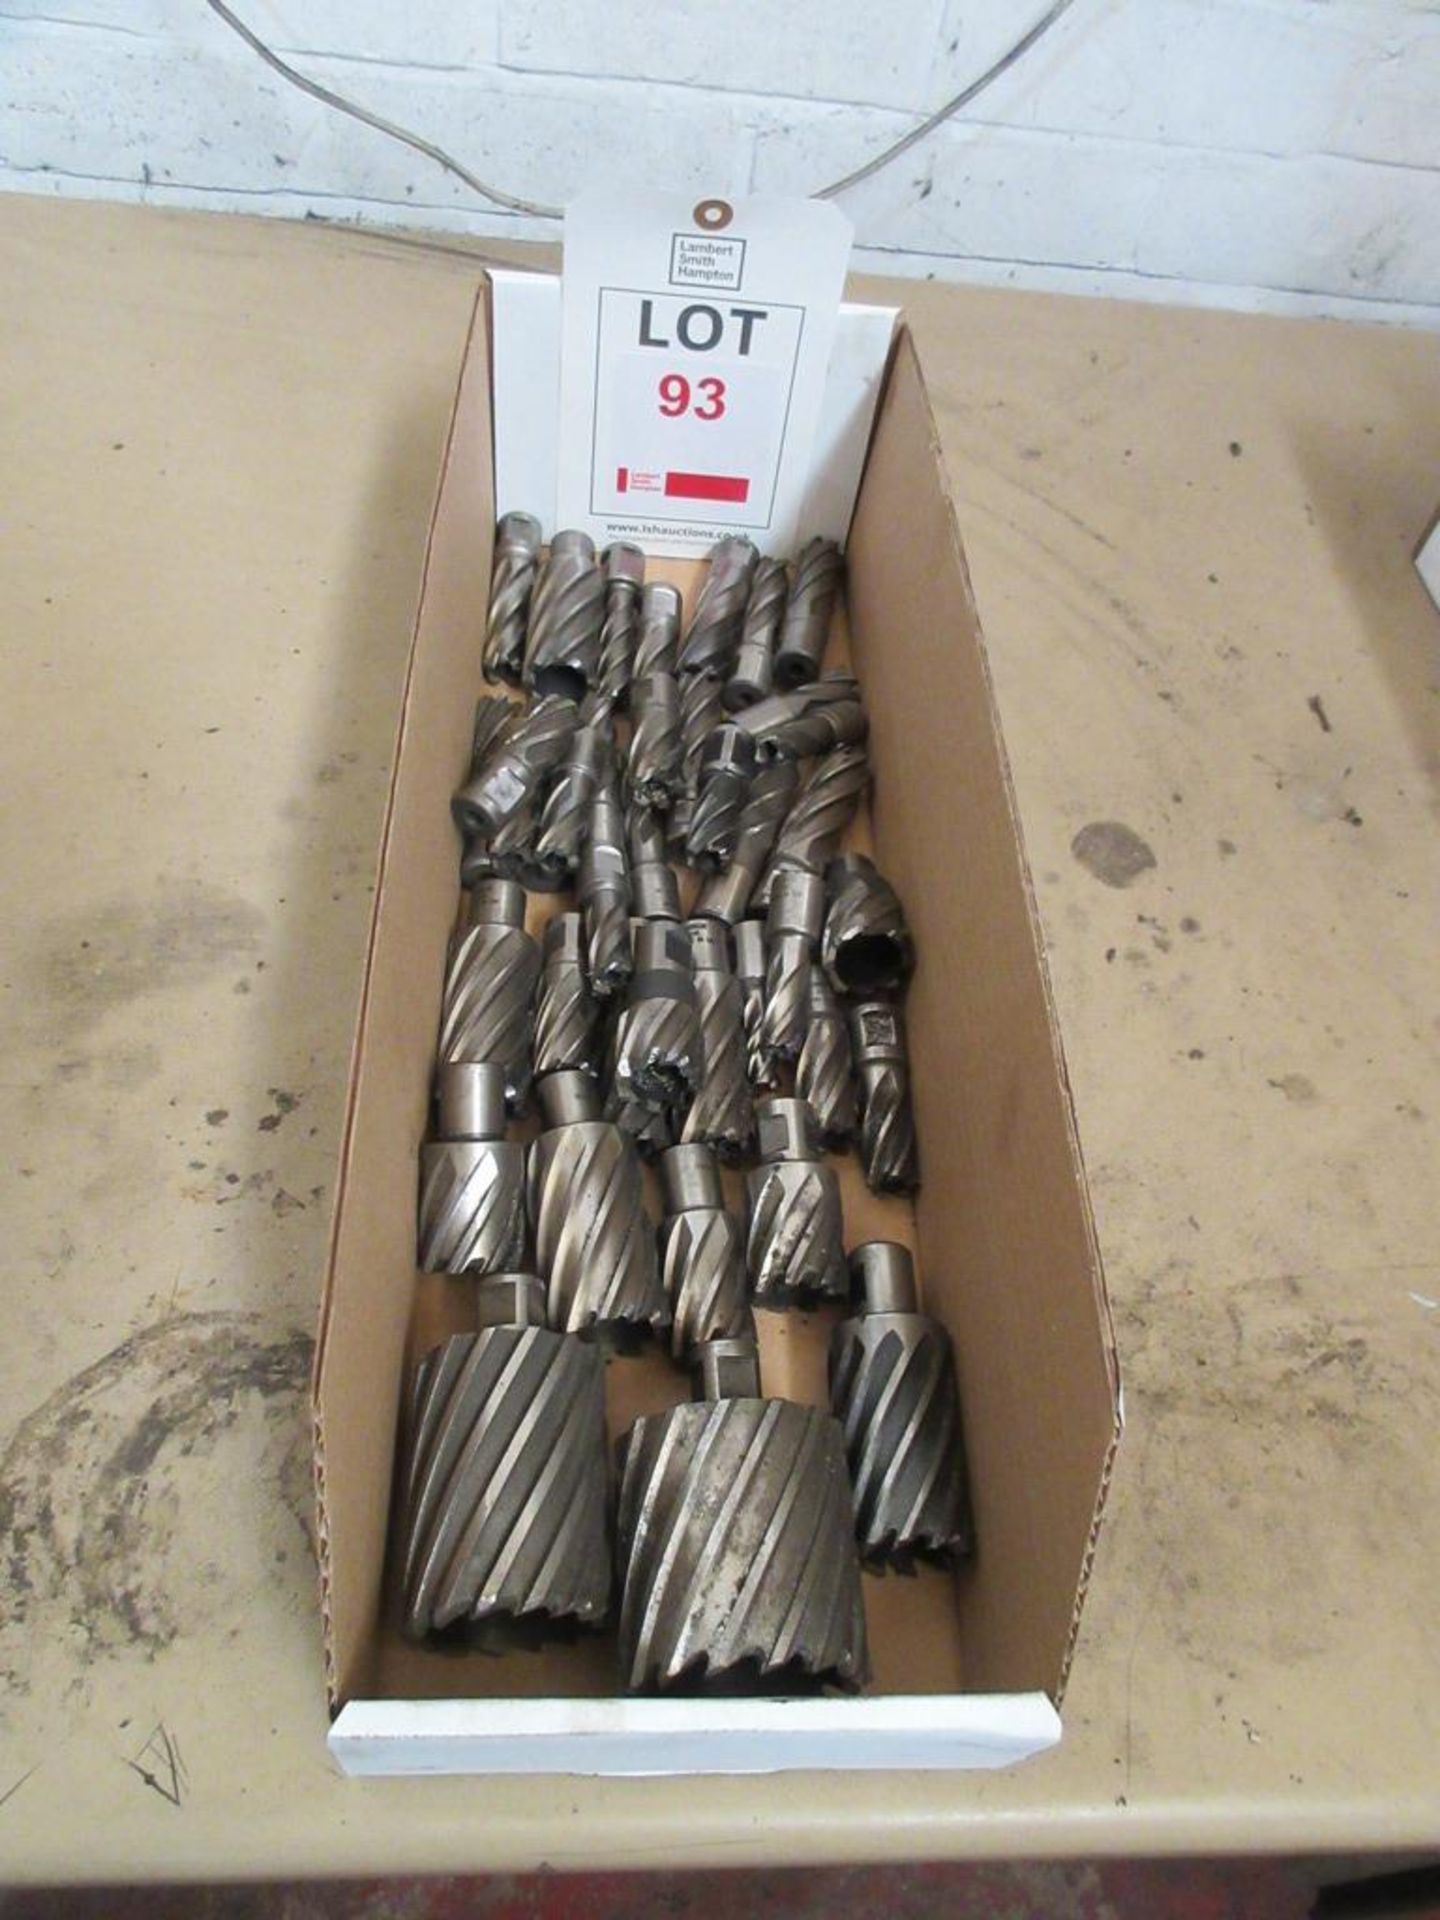 Quantity of Rotabroach hole cutters